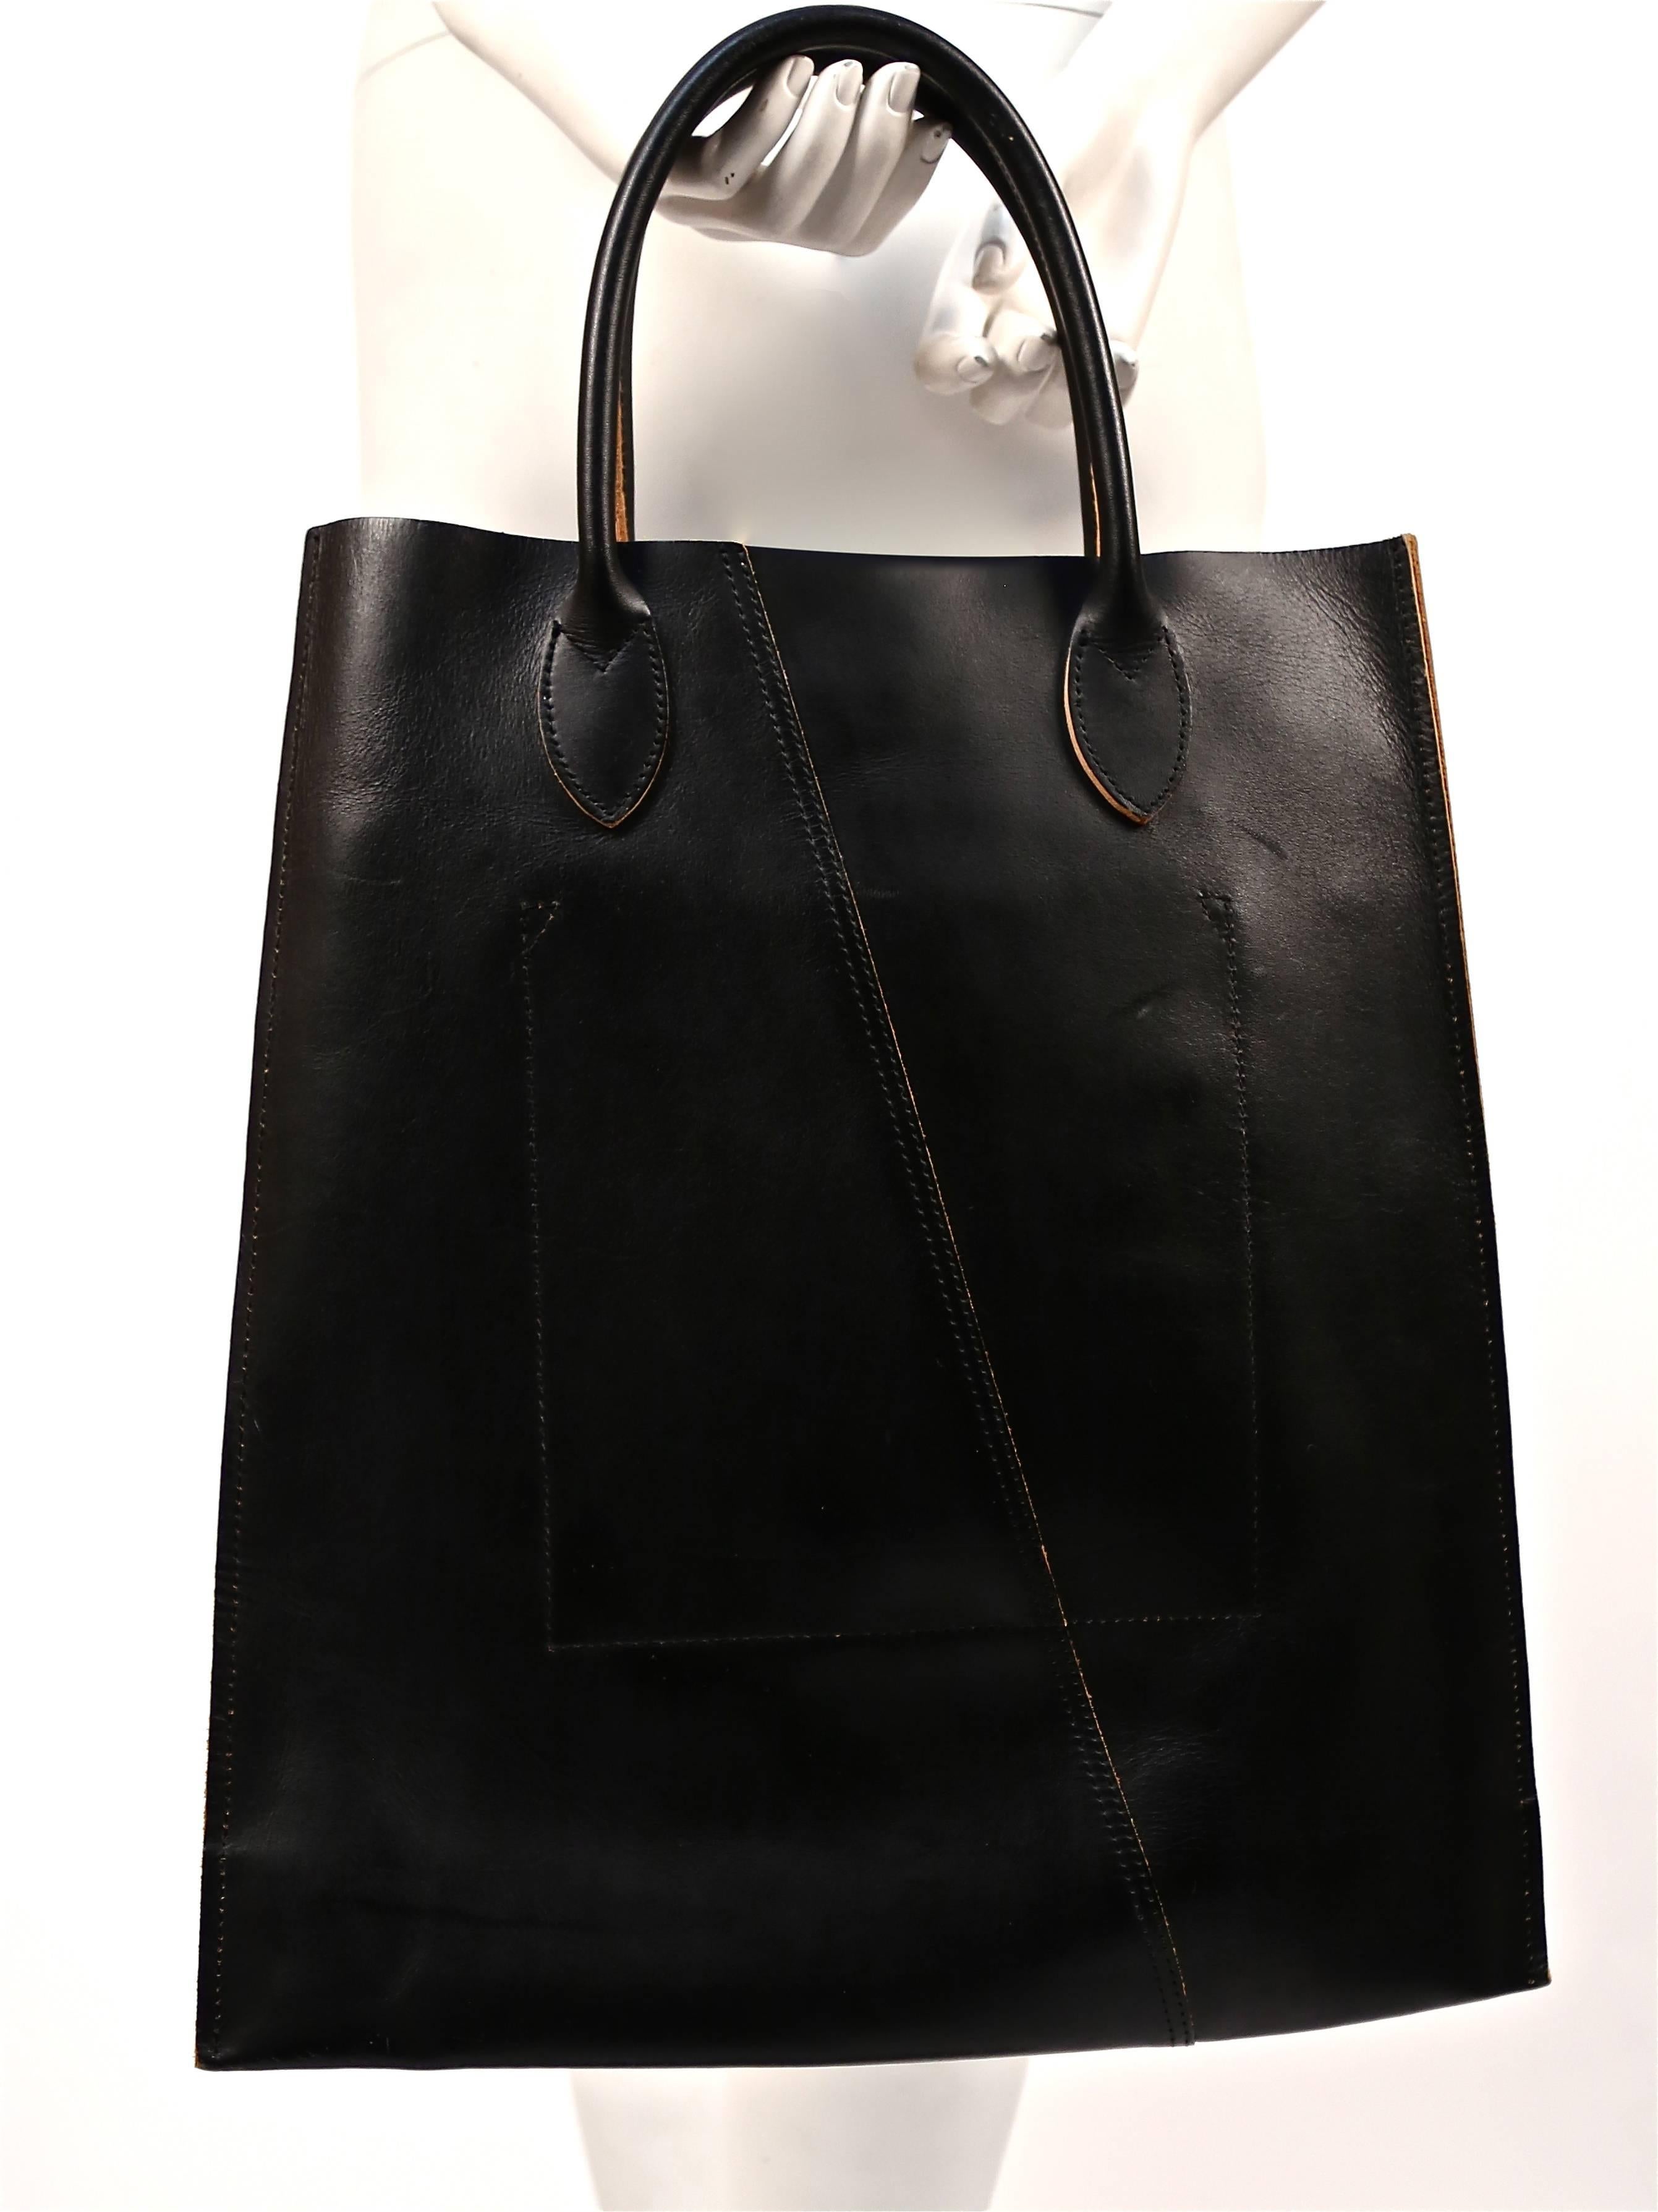 Very rare black cowhide leather bag with hand woven saddle stitching details from Comme Des Garcons dating to spring of 2005. Very similar to pieces seen on the runway. Bag measures approximately: 12.5